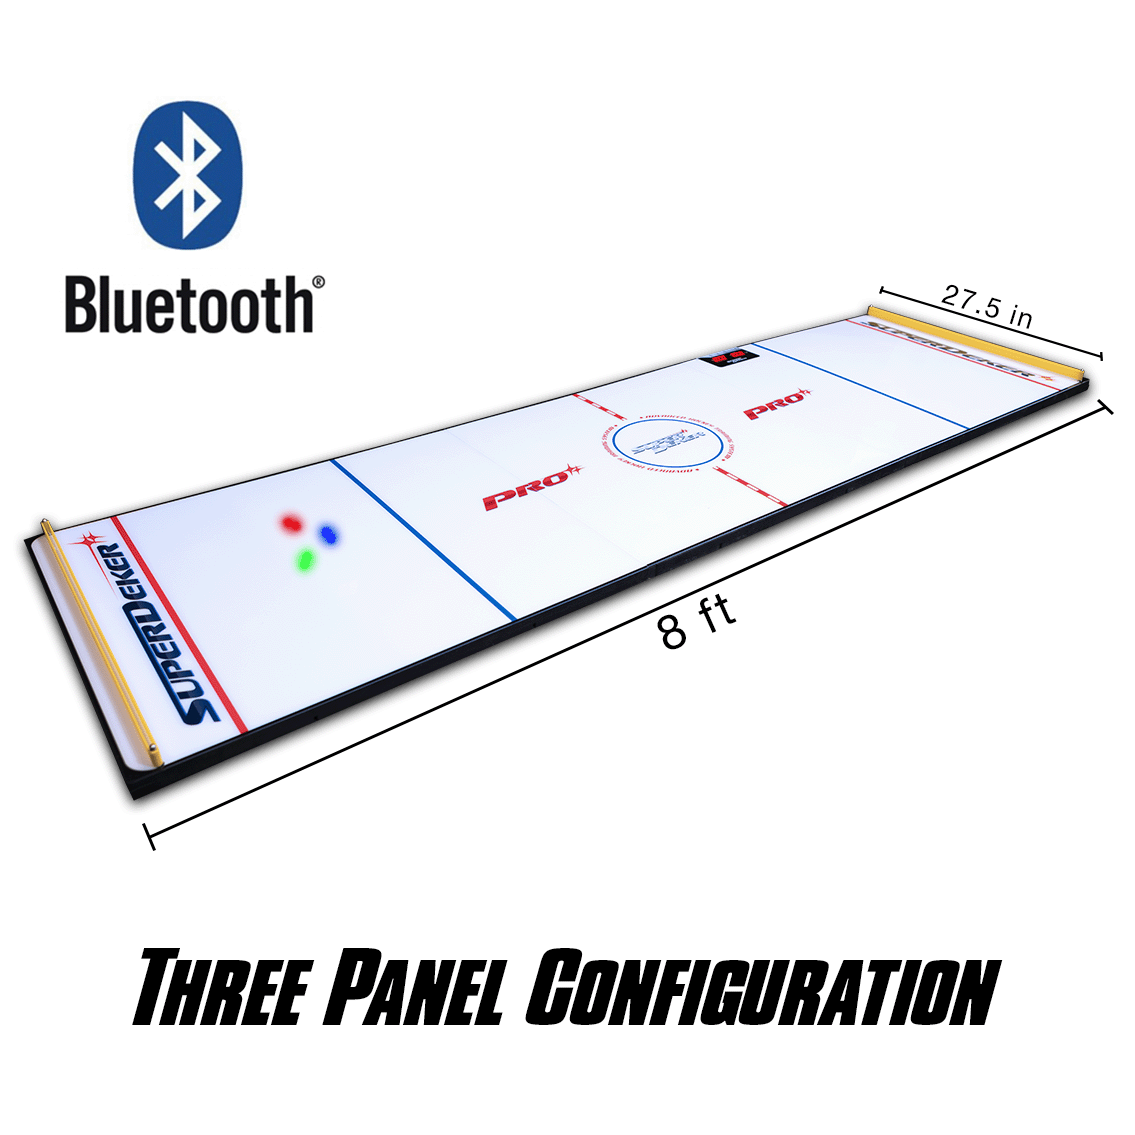 The SuperDekerPRO Fast Hands Hockey Trainer is the most mobile hockey stickhandling board. Now features wirless charging, and a 3-panel configuration for stickhandling training on the go!